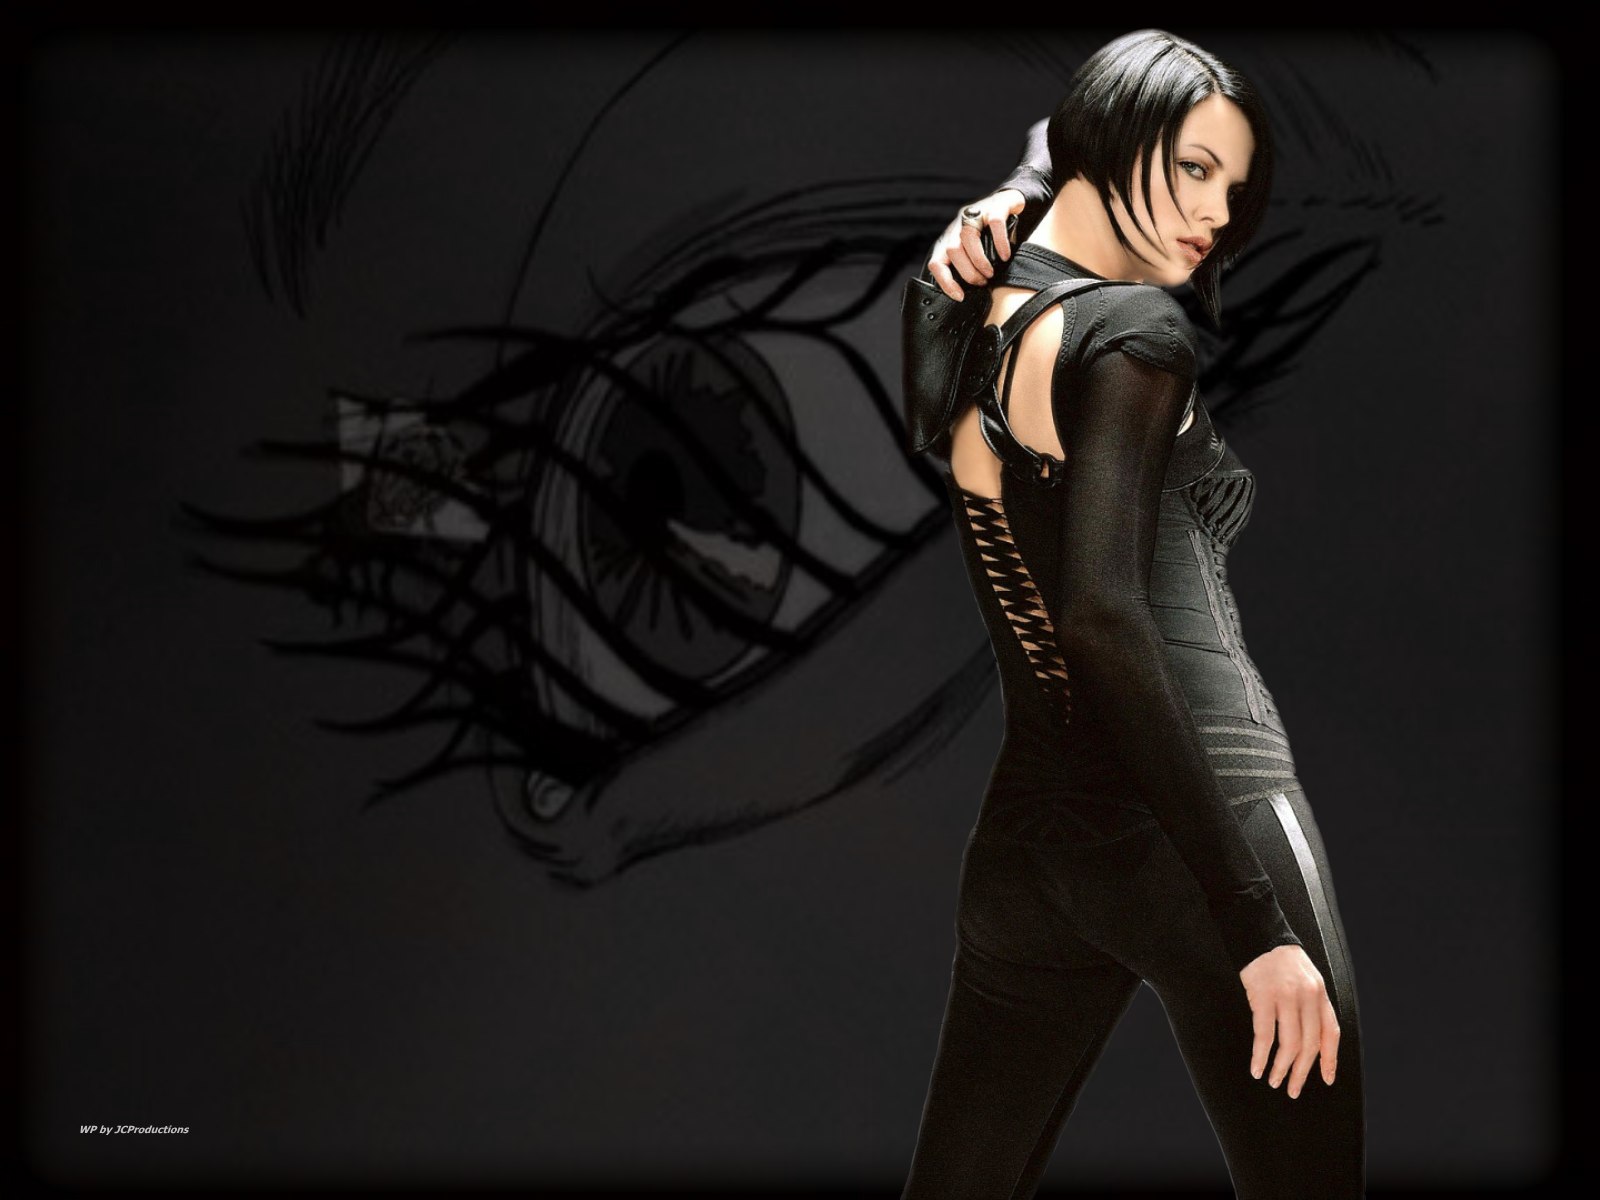 Aeon Flux Image HD Wallpaper And Background Photos